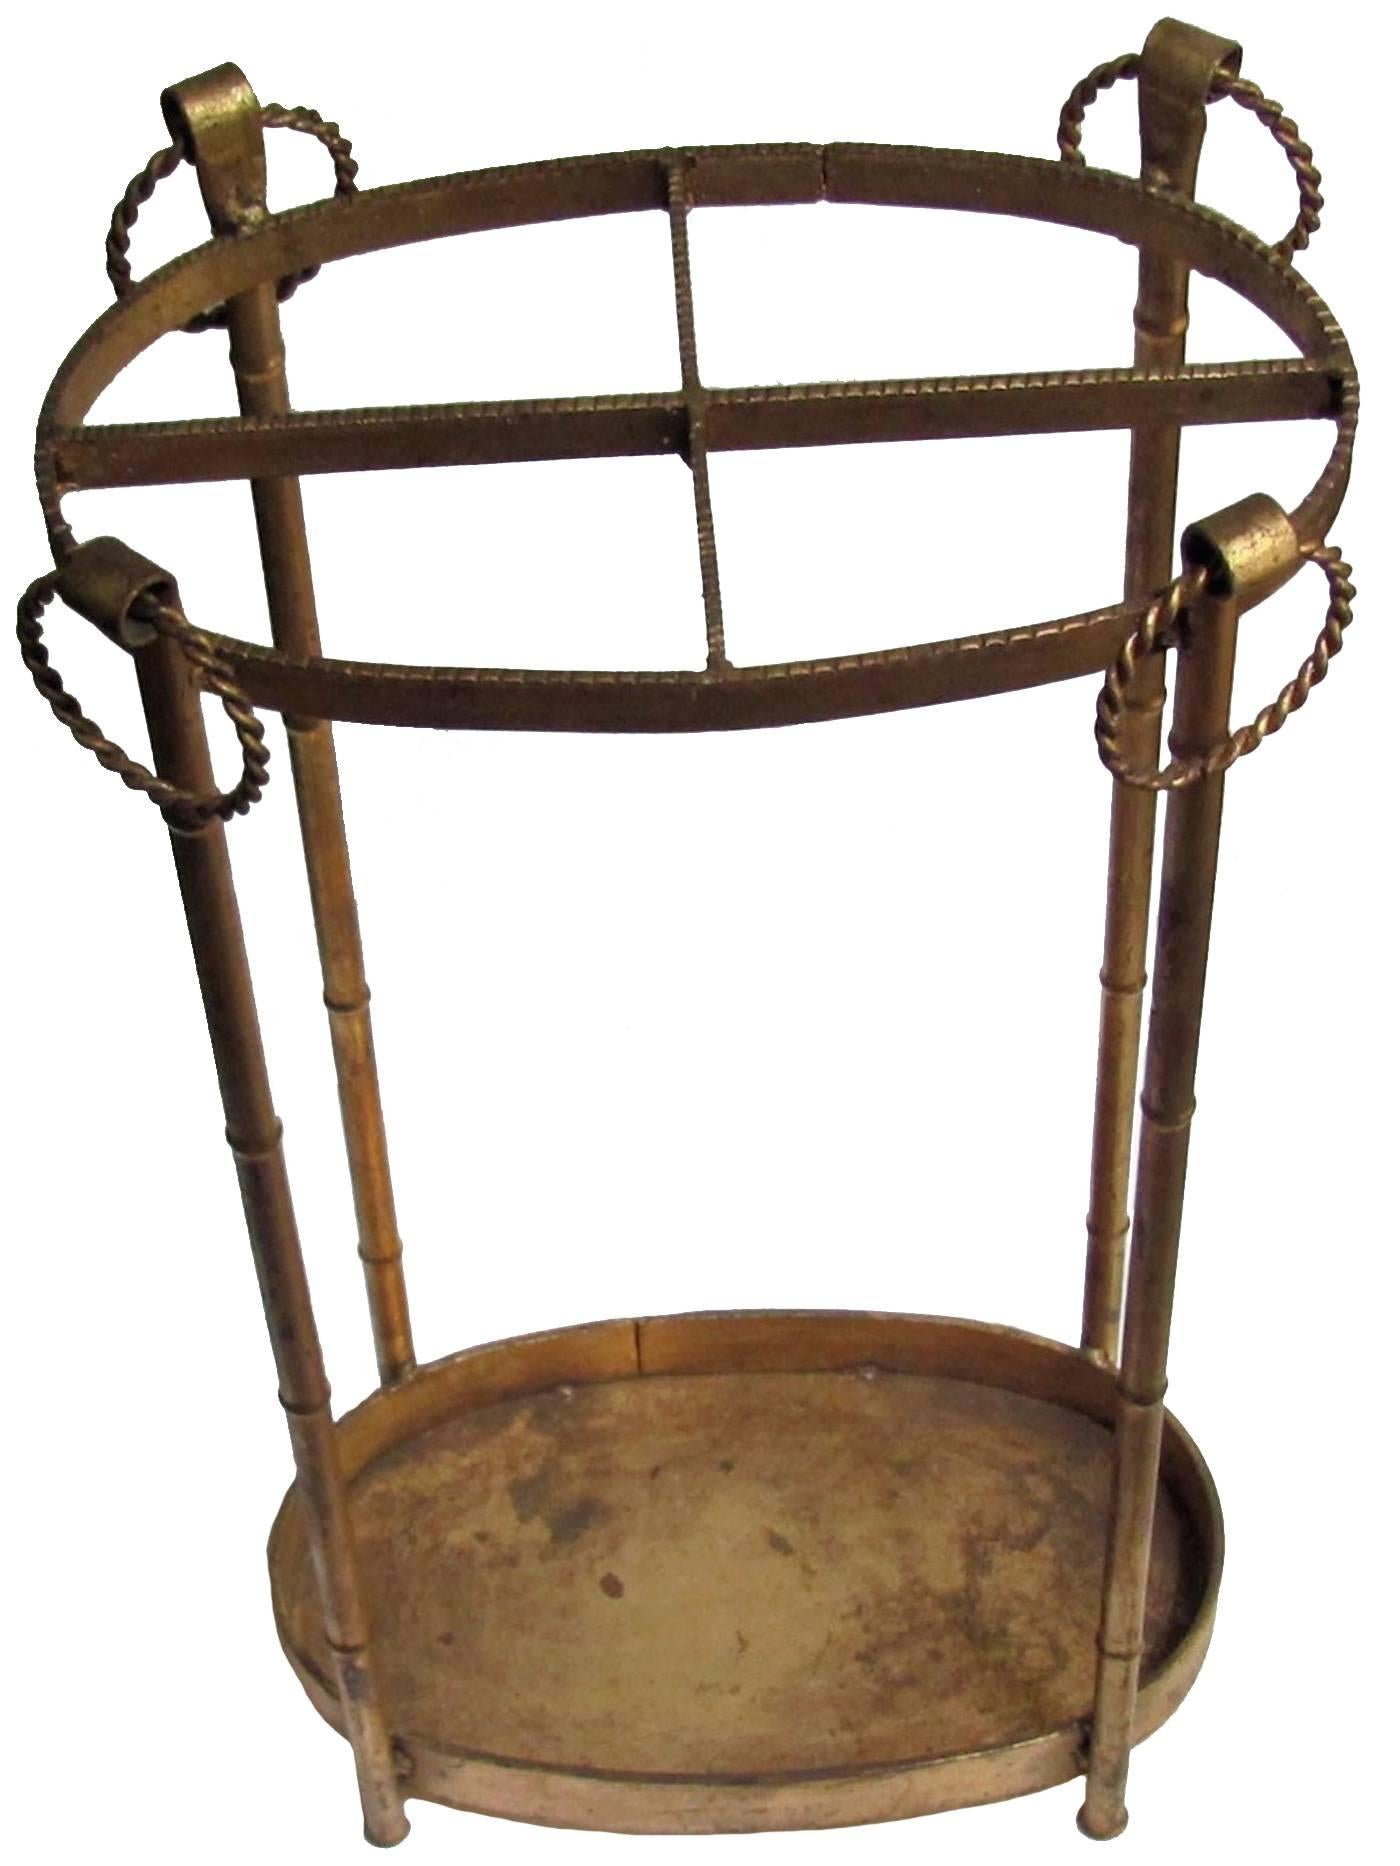 Midcentury Chinoiserie gilt metal faux bamboo umbrella stand. Light overall wear from age and use.